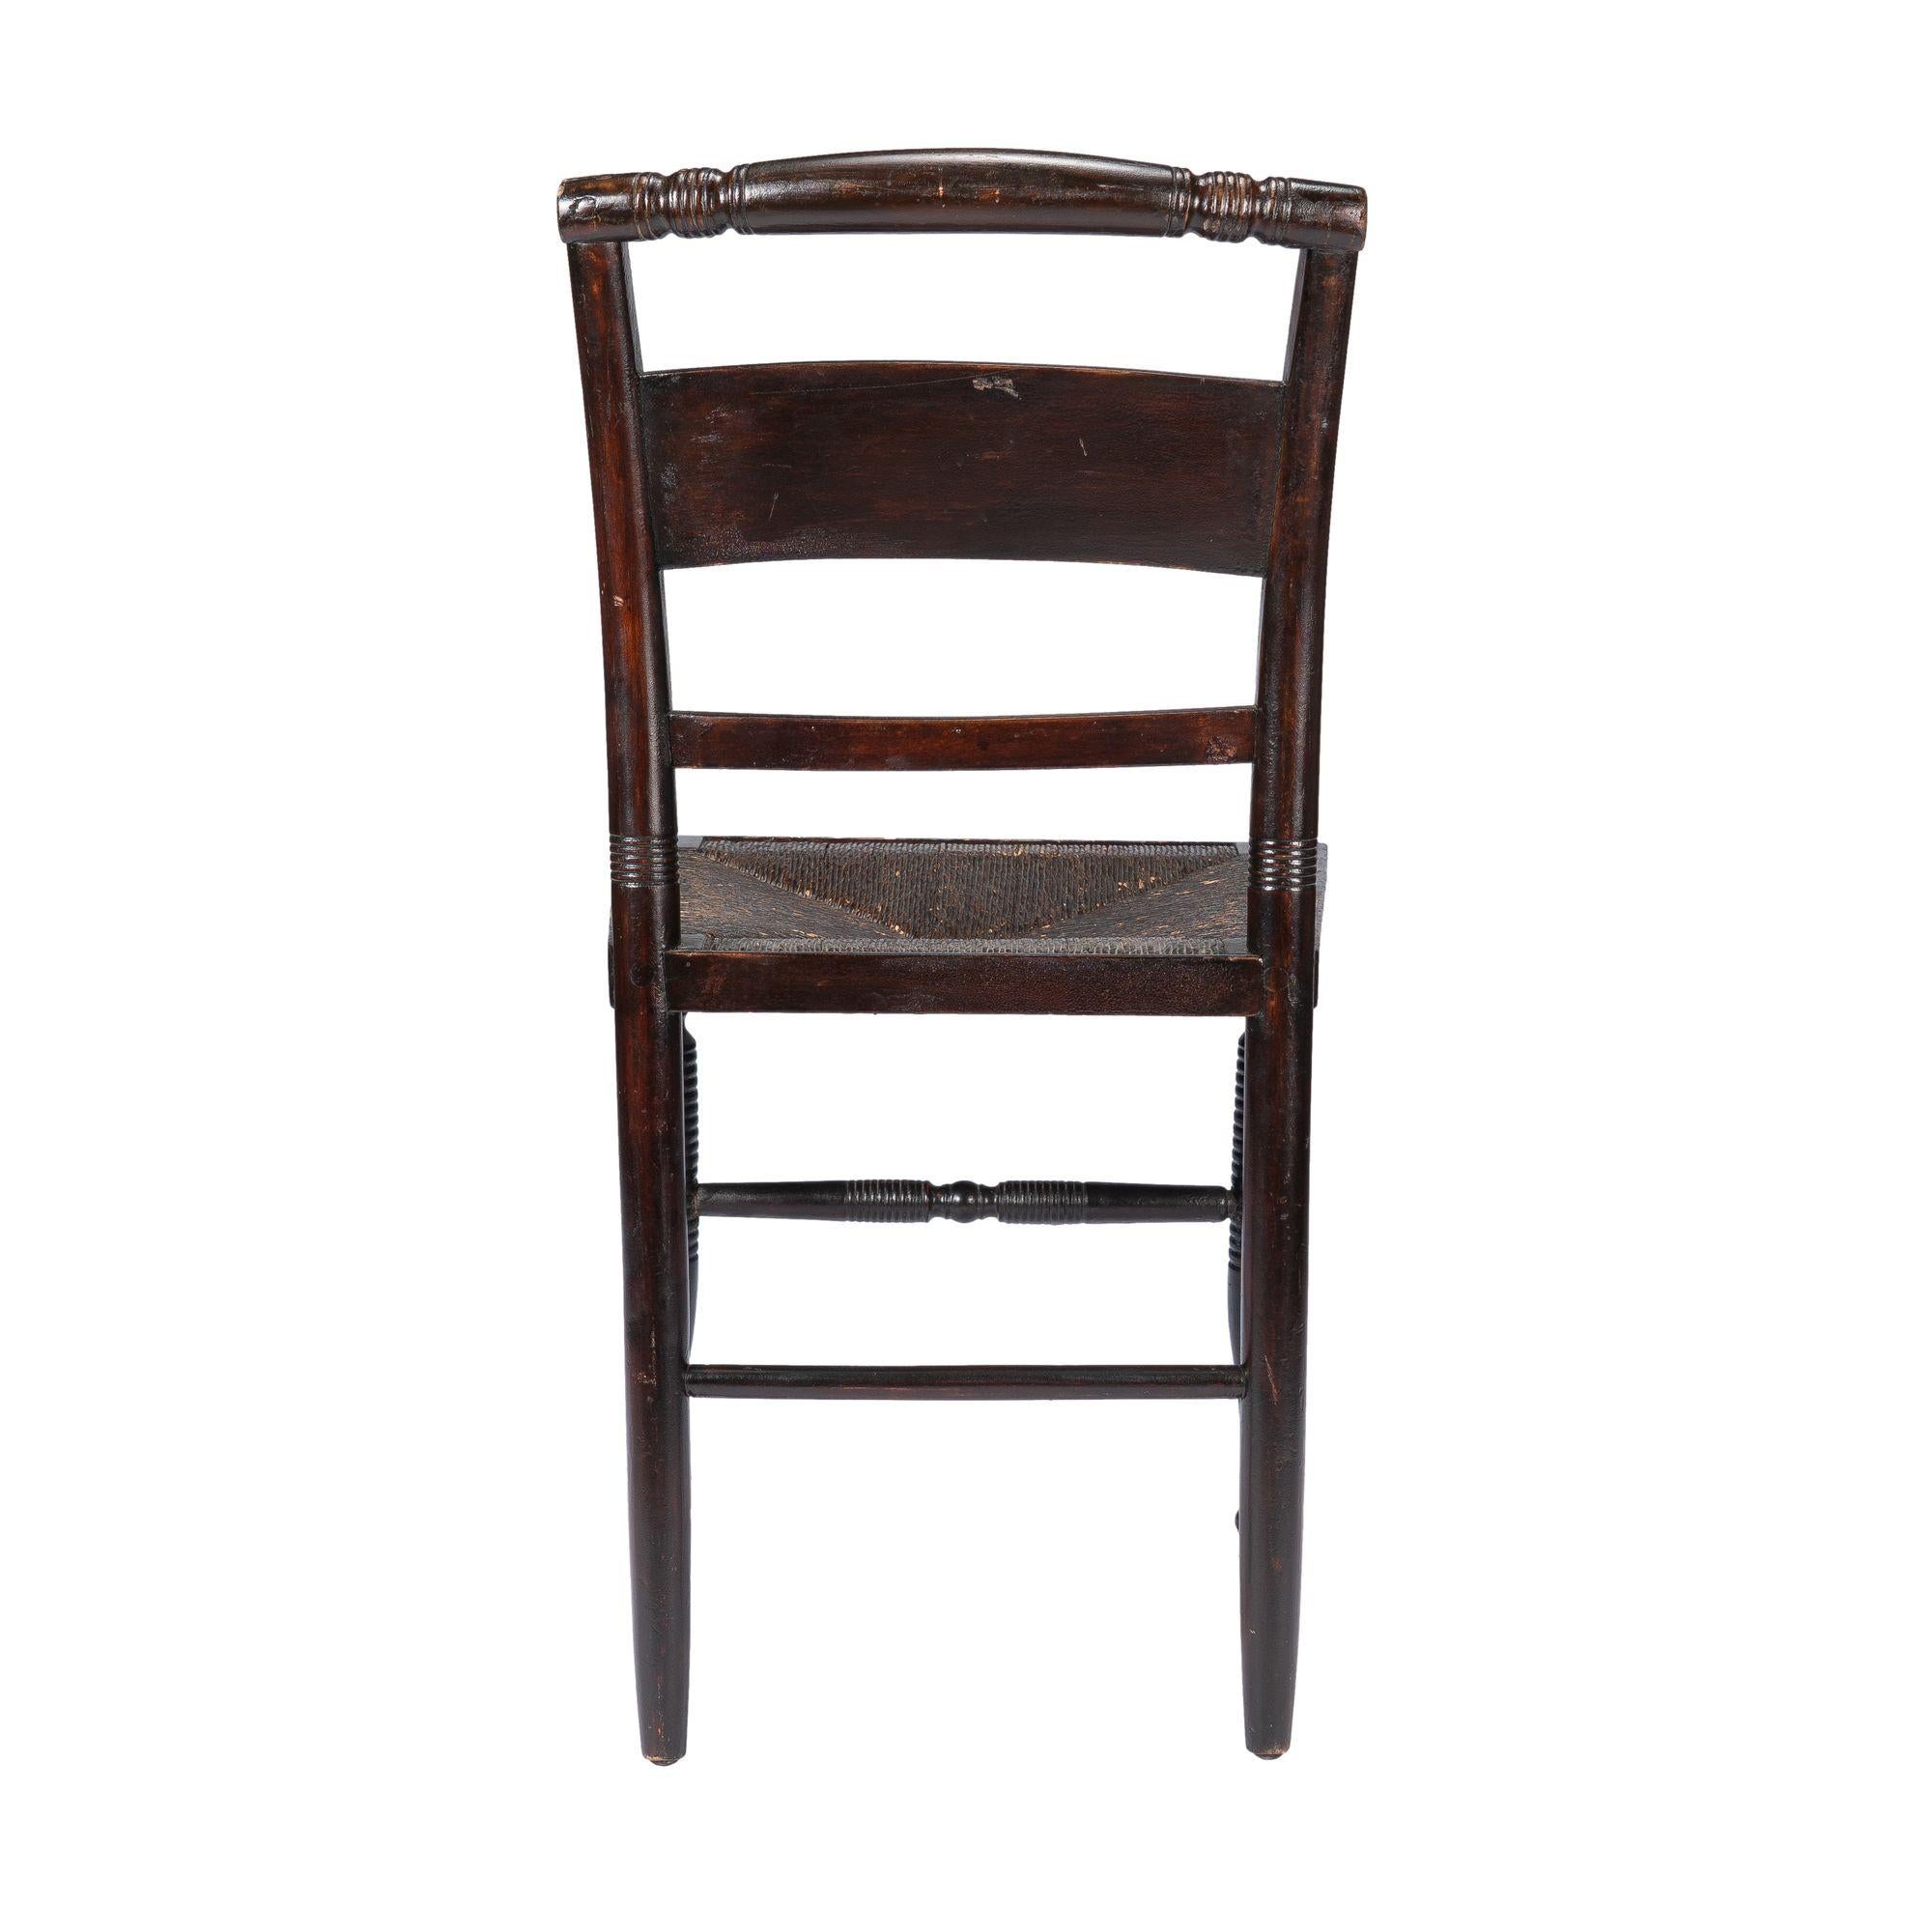 Early 19th Century Connecticut Valley Hitchcock rush seat side chair, 1820